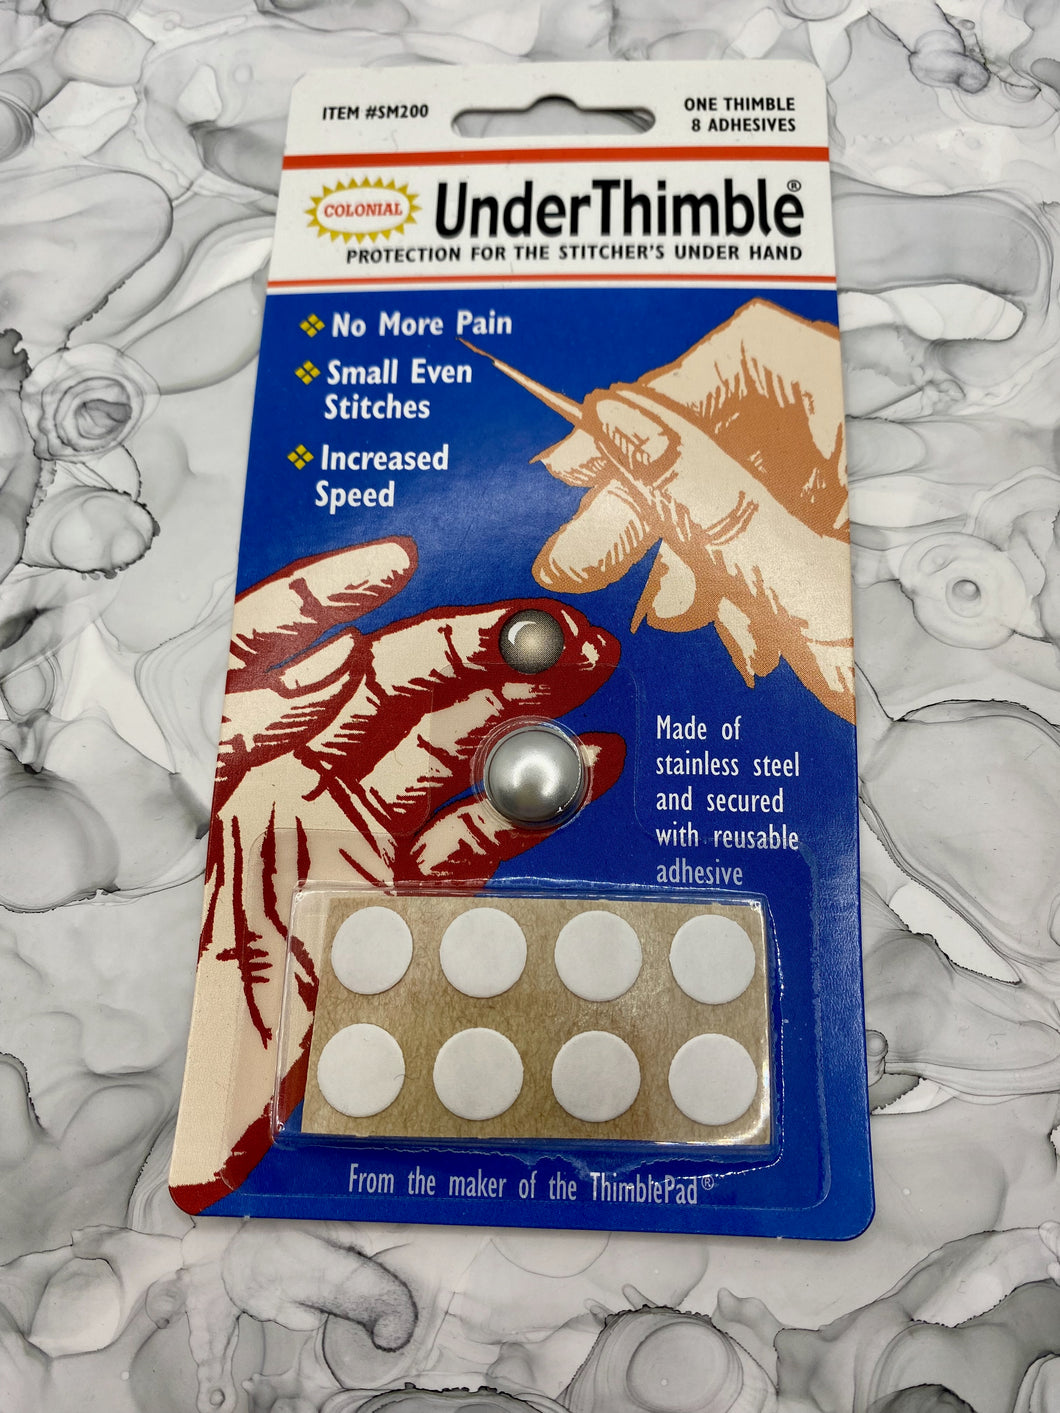 Under Thimble: Protection for the Stitcher's Under Hand by Colonial